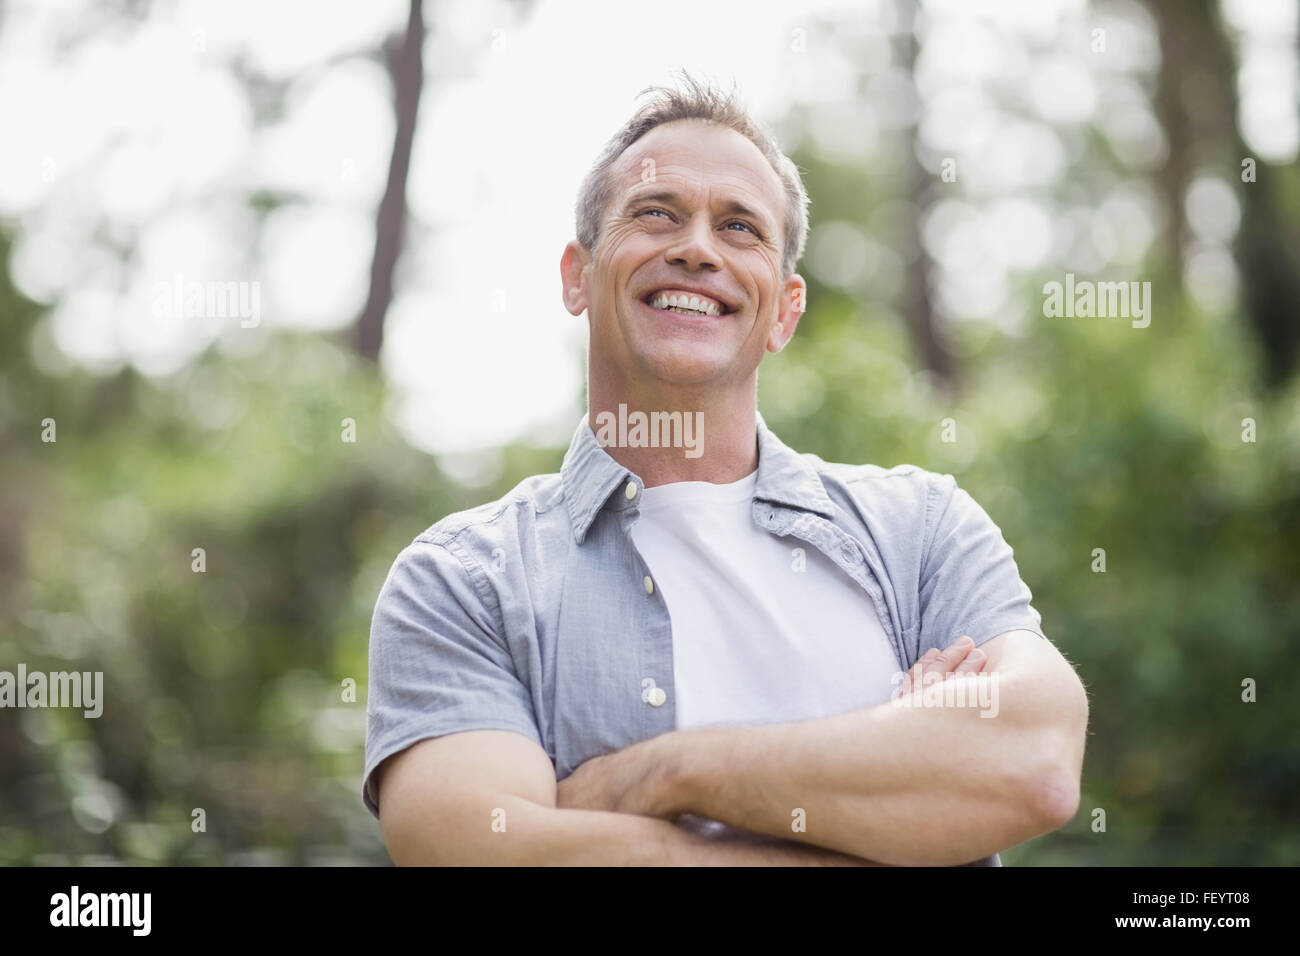 Smiling man crossing his arms Stock Photo